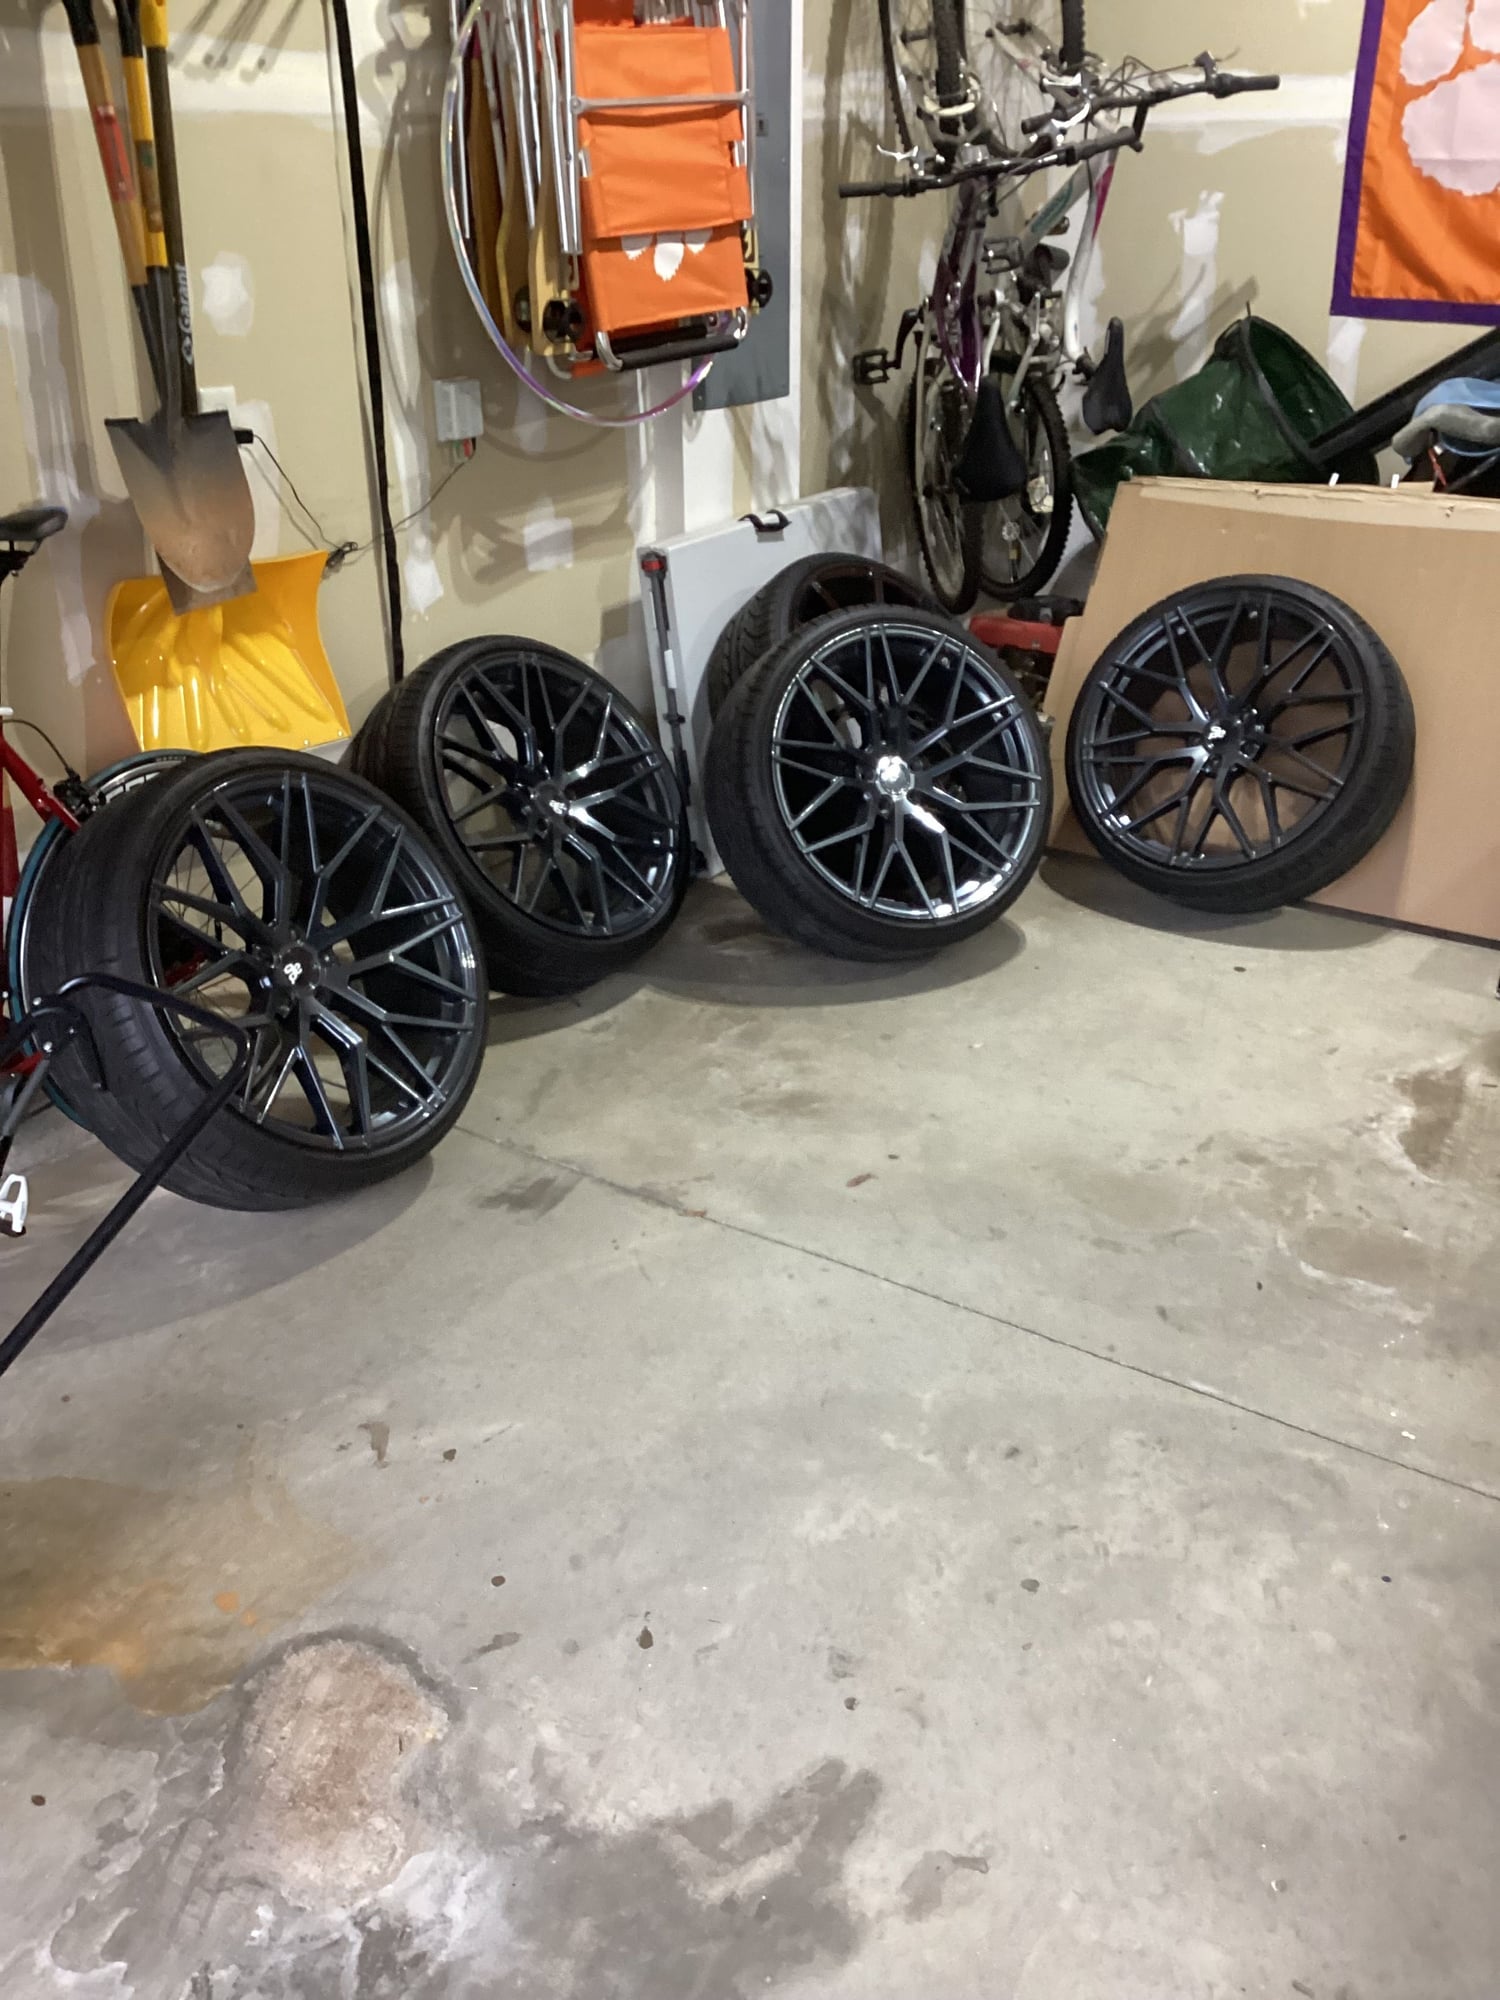 Wheels and Tires/Axles - FS: 22” 5X120 AG M520R wheels/tires Local pick up only - Used - All Years  All Models - Greer, SC 29650, United States